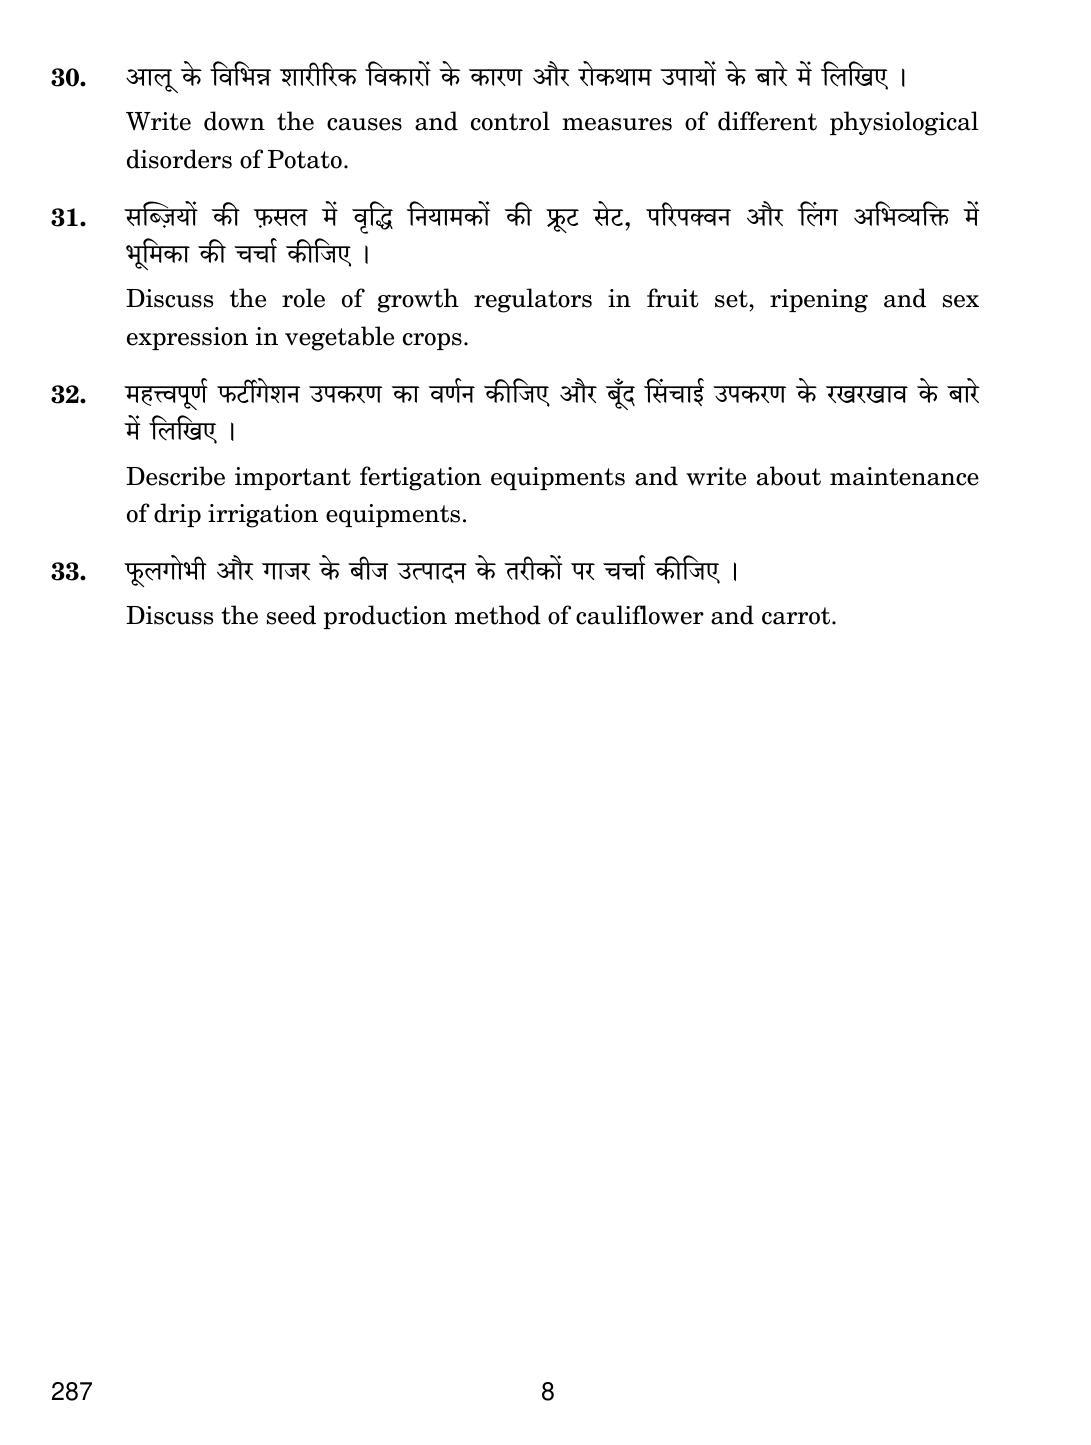 CBSE Class 12 287 Olericulture 2019 Question Paper - Page 8